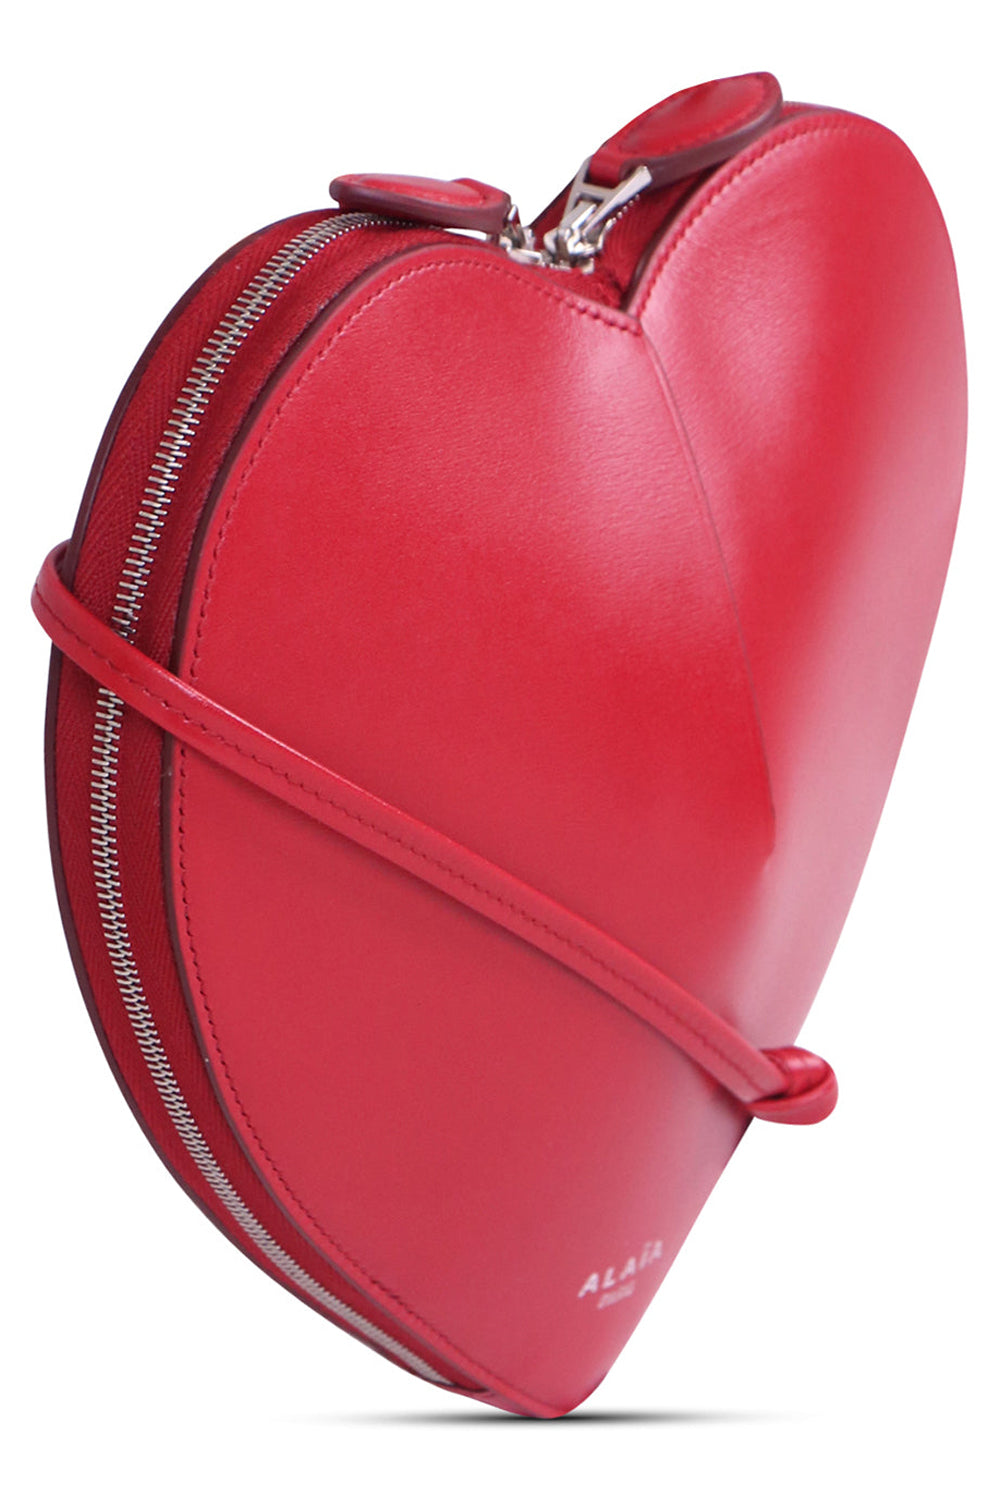 ALAIA BAGS RED / 331 - LAQUE / ONE SIZE Le Coeur Heart Shape Calfskin Bag | Red